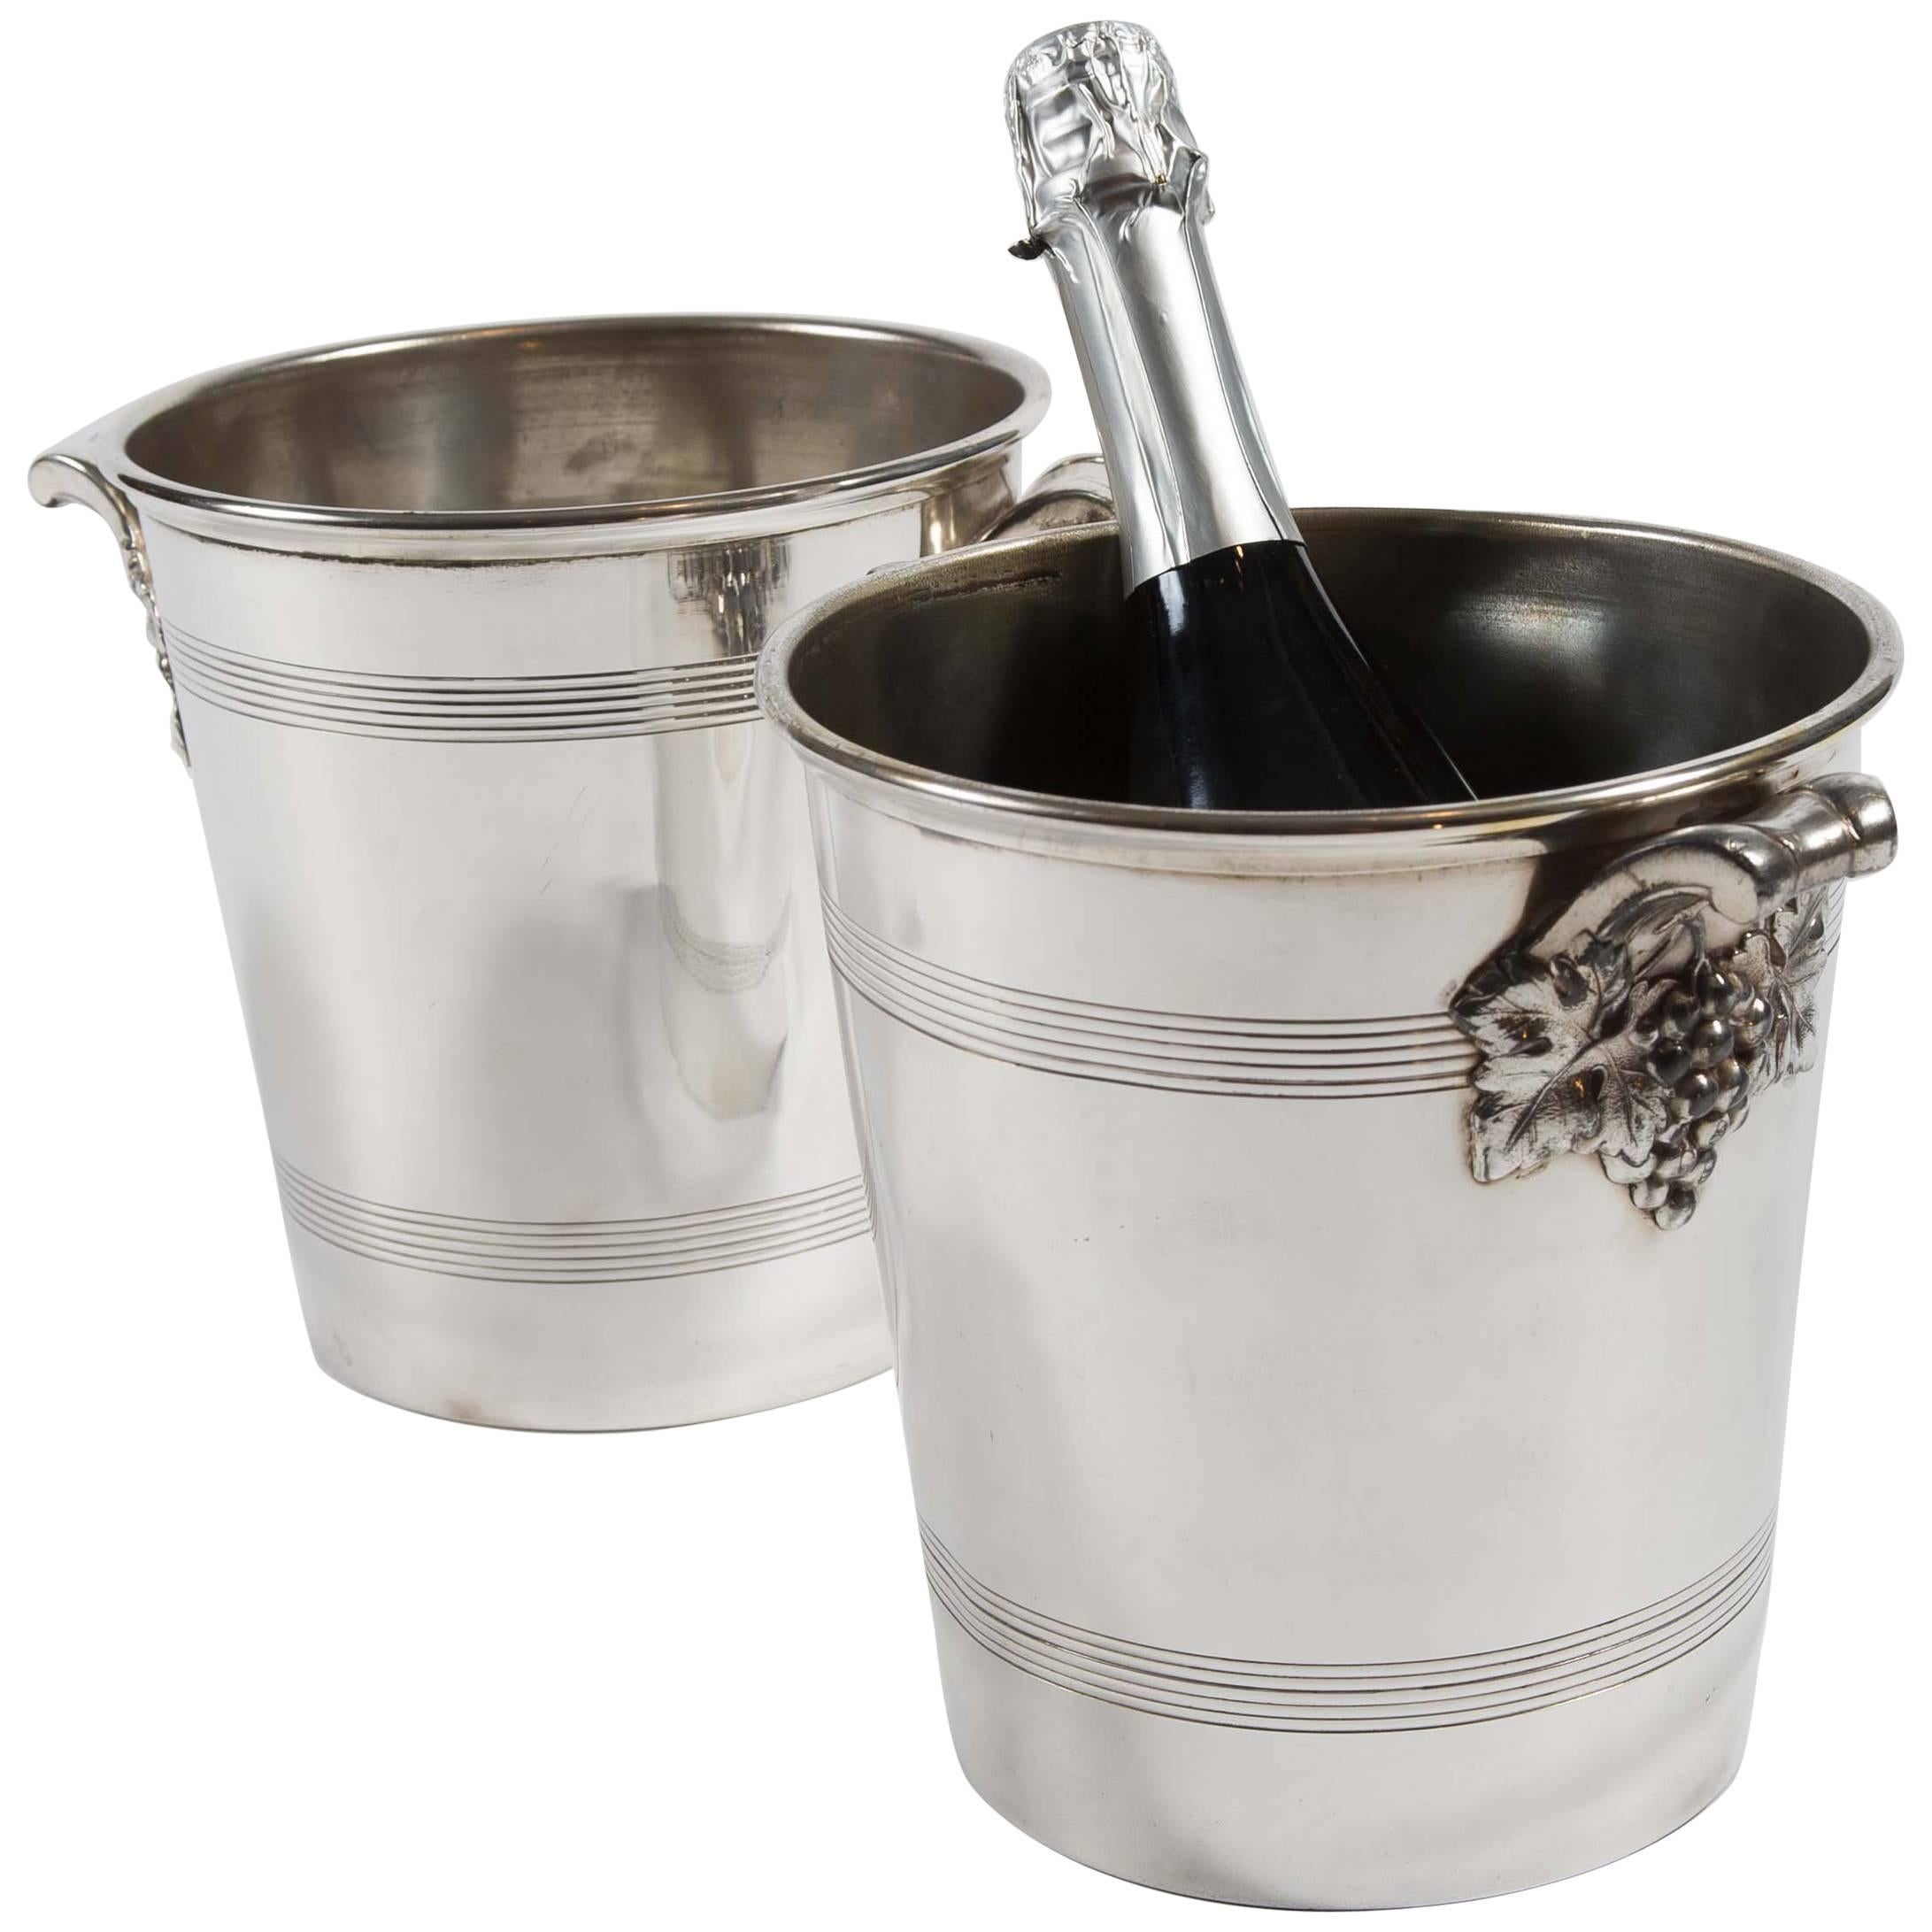 Pair of Early 20th Century French Silver Plated Champagne Buckets by Tete Leroy